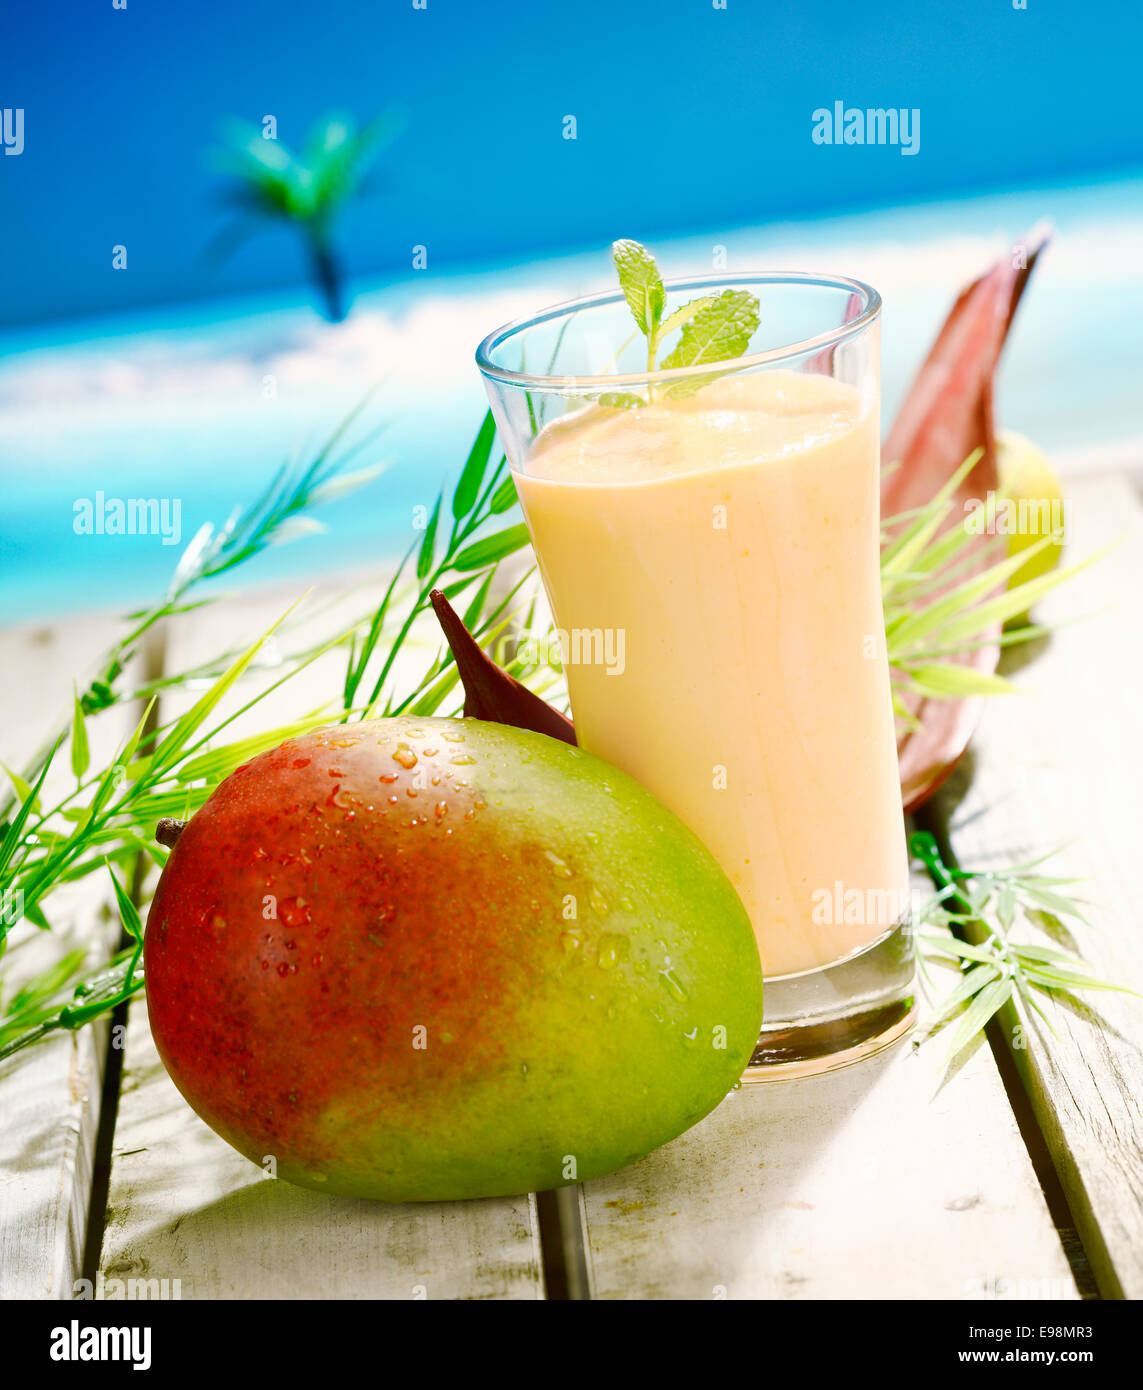 Glass of creamy mango and yoghurt smoothie dessert with a large ripe mango on a wooden deck overlooking the sea Stock Photo